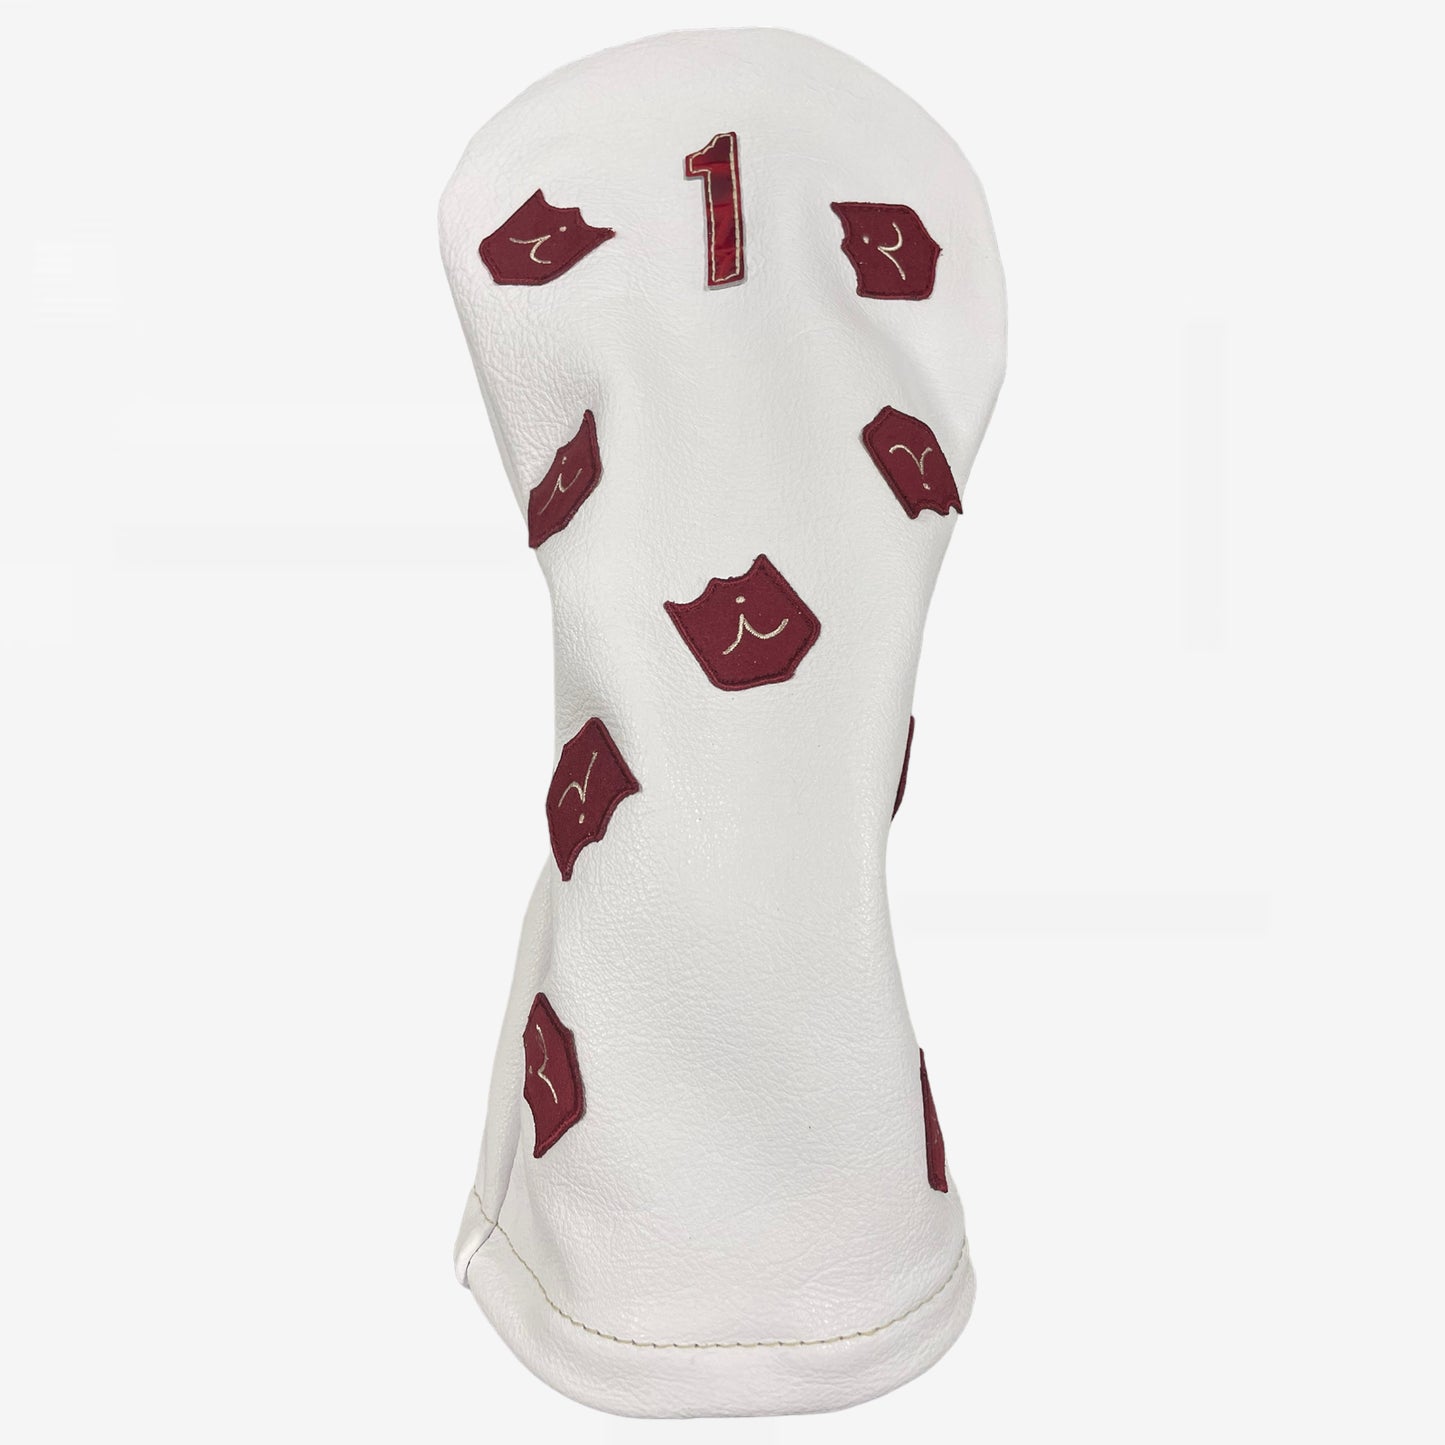 Dancing Crest Headcover: Pure White + Red Patent Croc